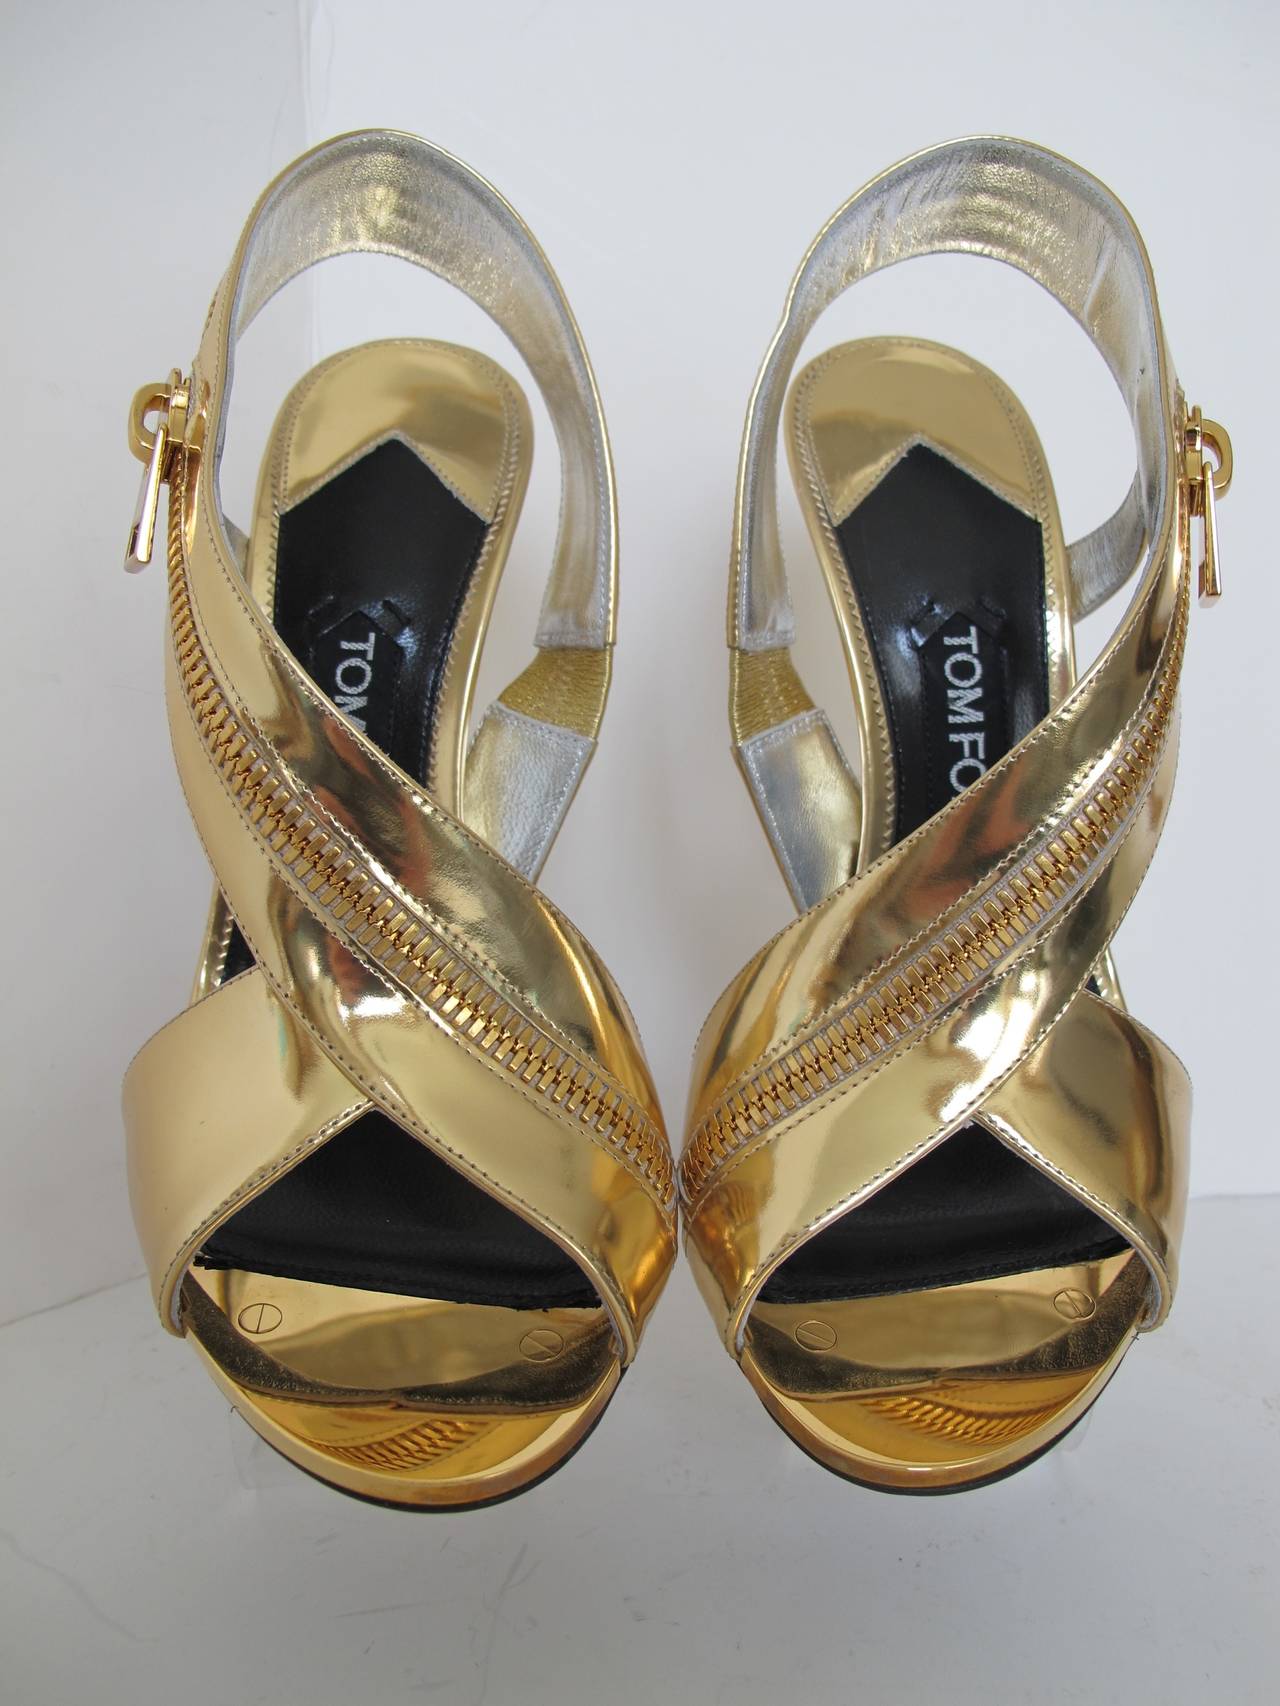 Tom Ford Gold Sling Back Sandal with Wrap Around Zipper is perfect for day or evening. There is 1.375 inch metal piece with two inset screws at the toe. Heel measures 4.5 inches.